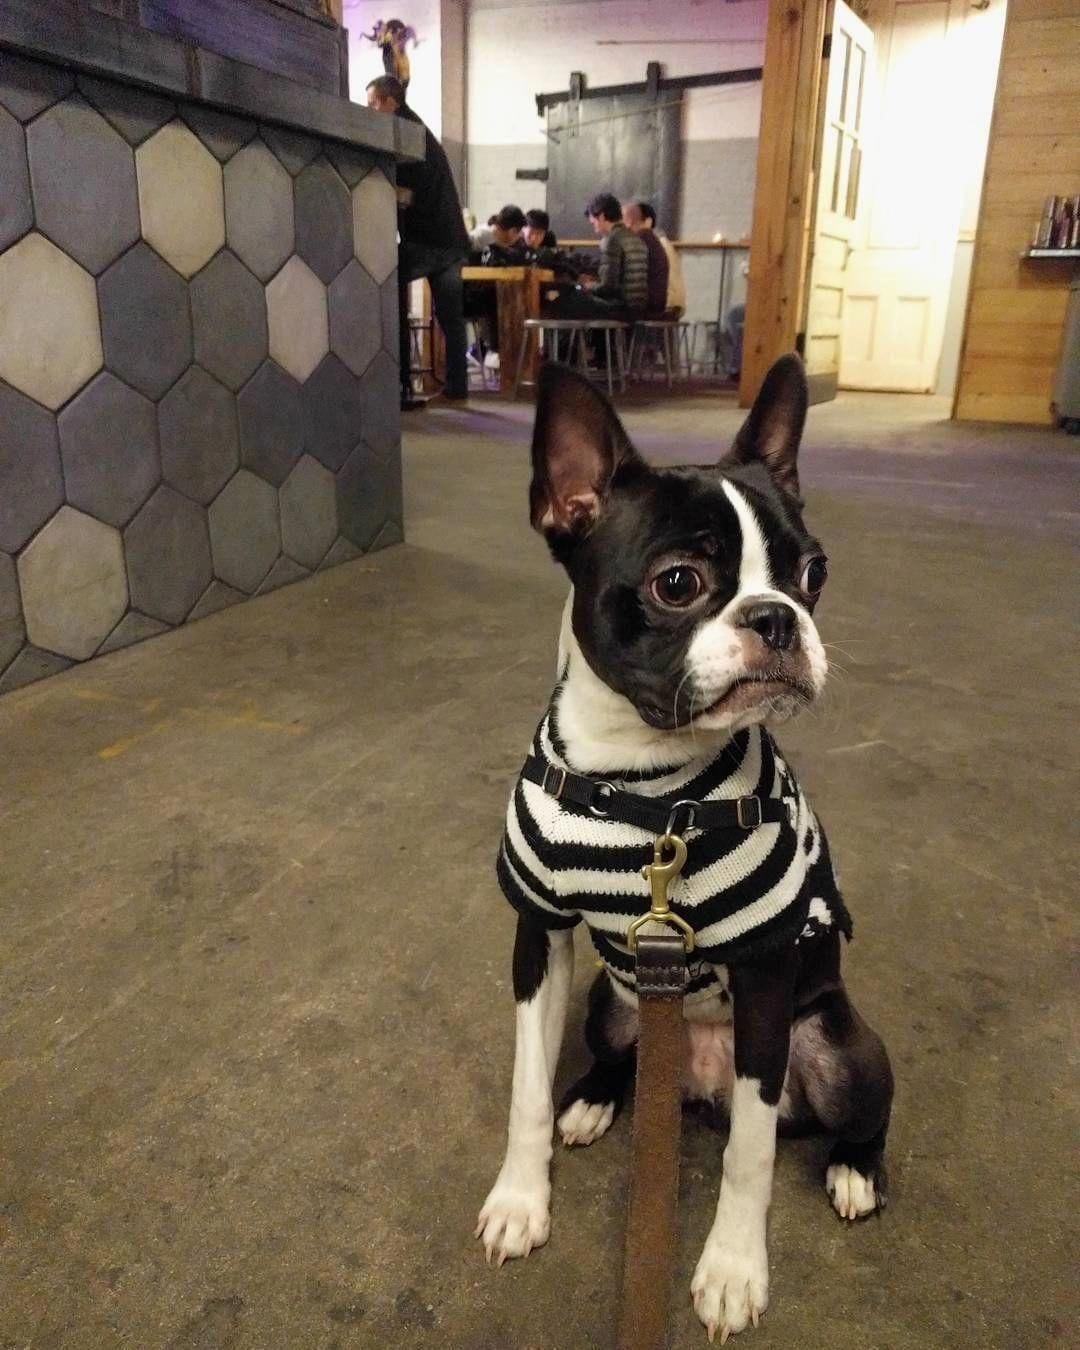 Boston Terrier dog sitting on the floor wearing its striped sweater